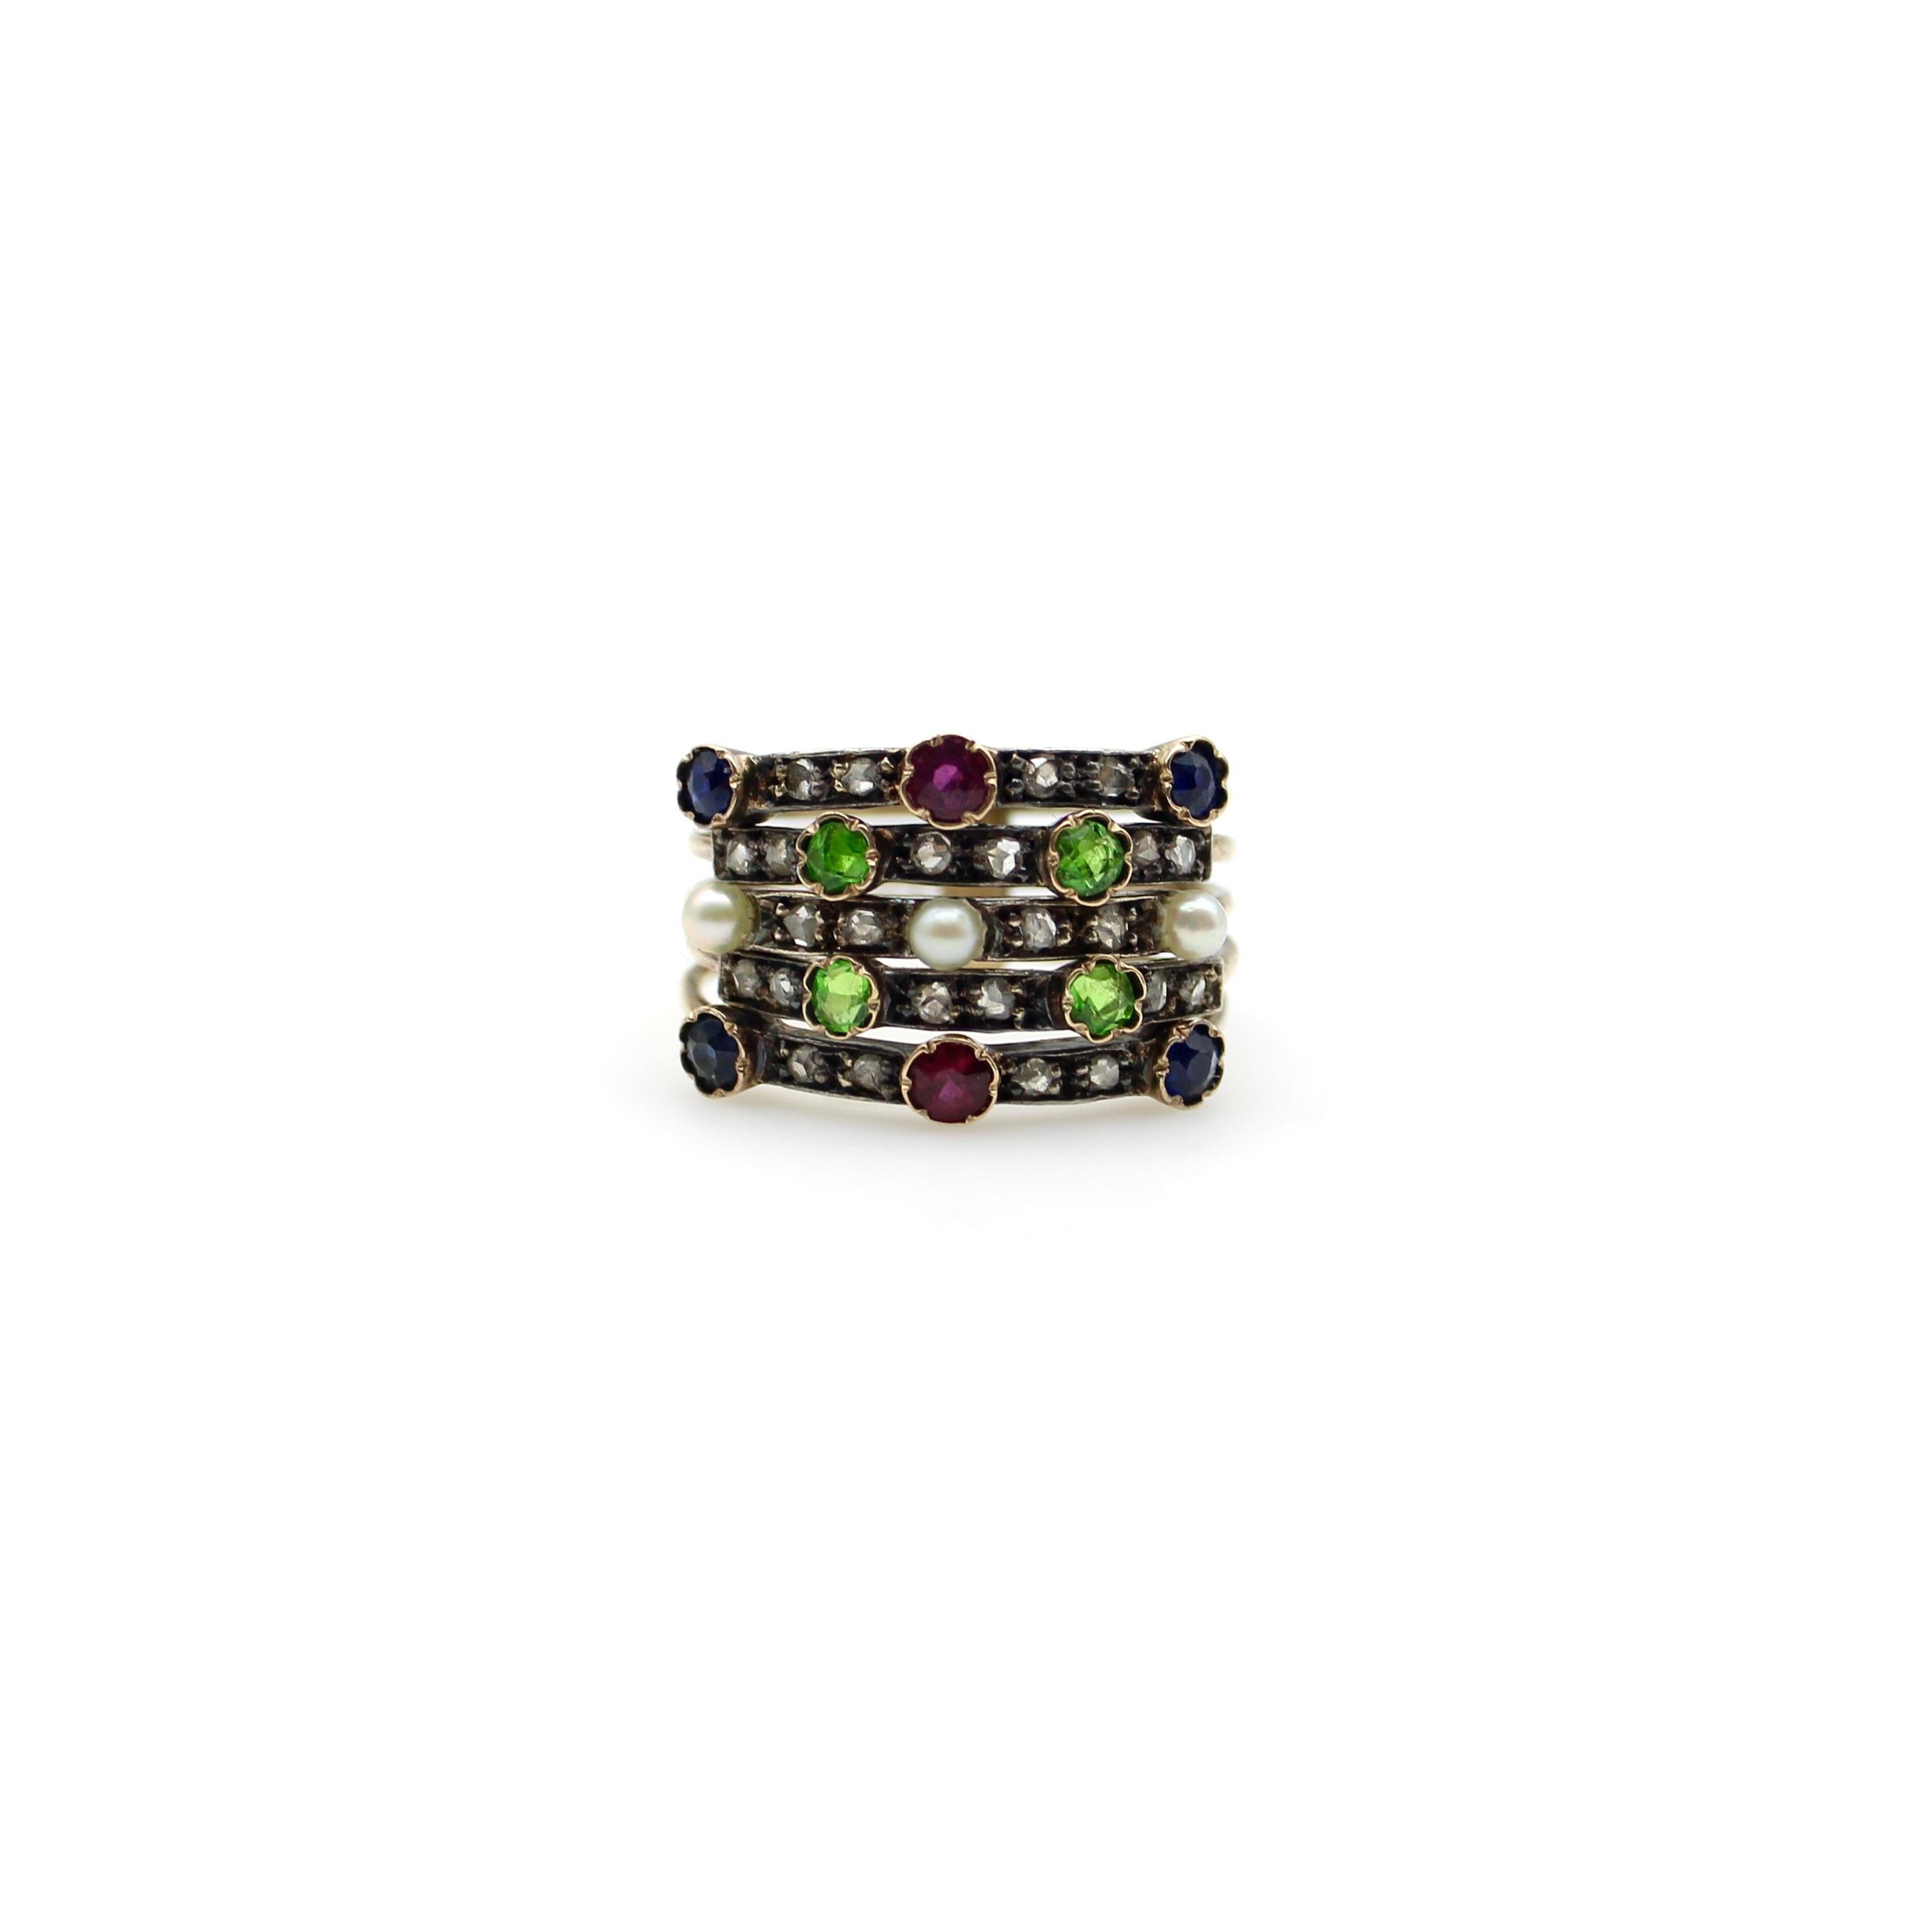 This beautiful 14k gold Edwardian harem ring contains an array of Rose Cut diamonds, pearls, sapphires, rubies, and green demantoid garnets. The ring consists of five 14k gold bands, held together at the bottom in a half-hoop that connects the bands